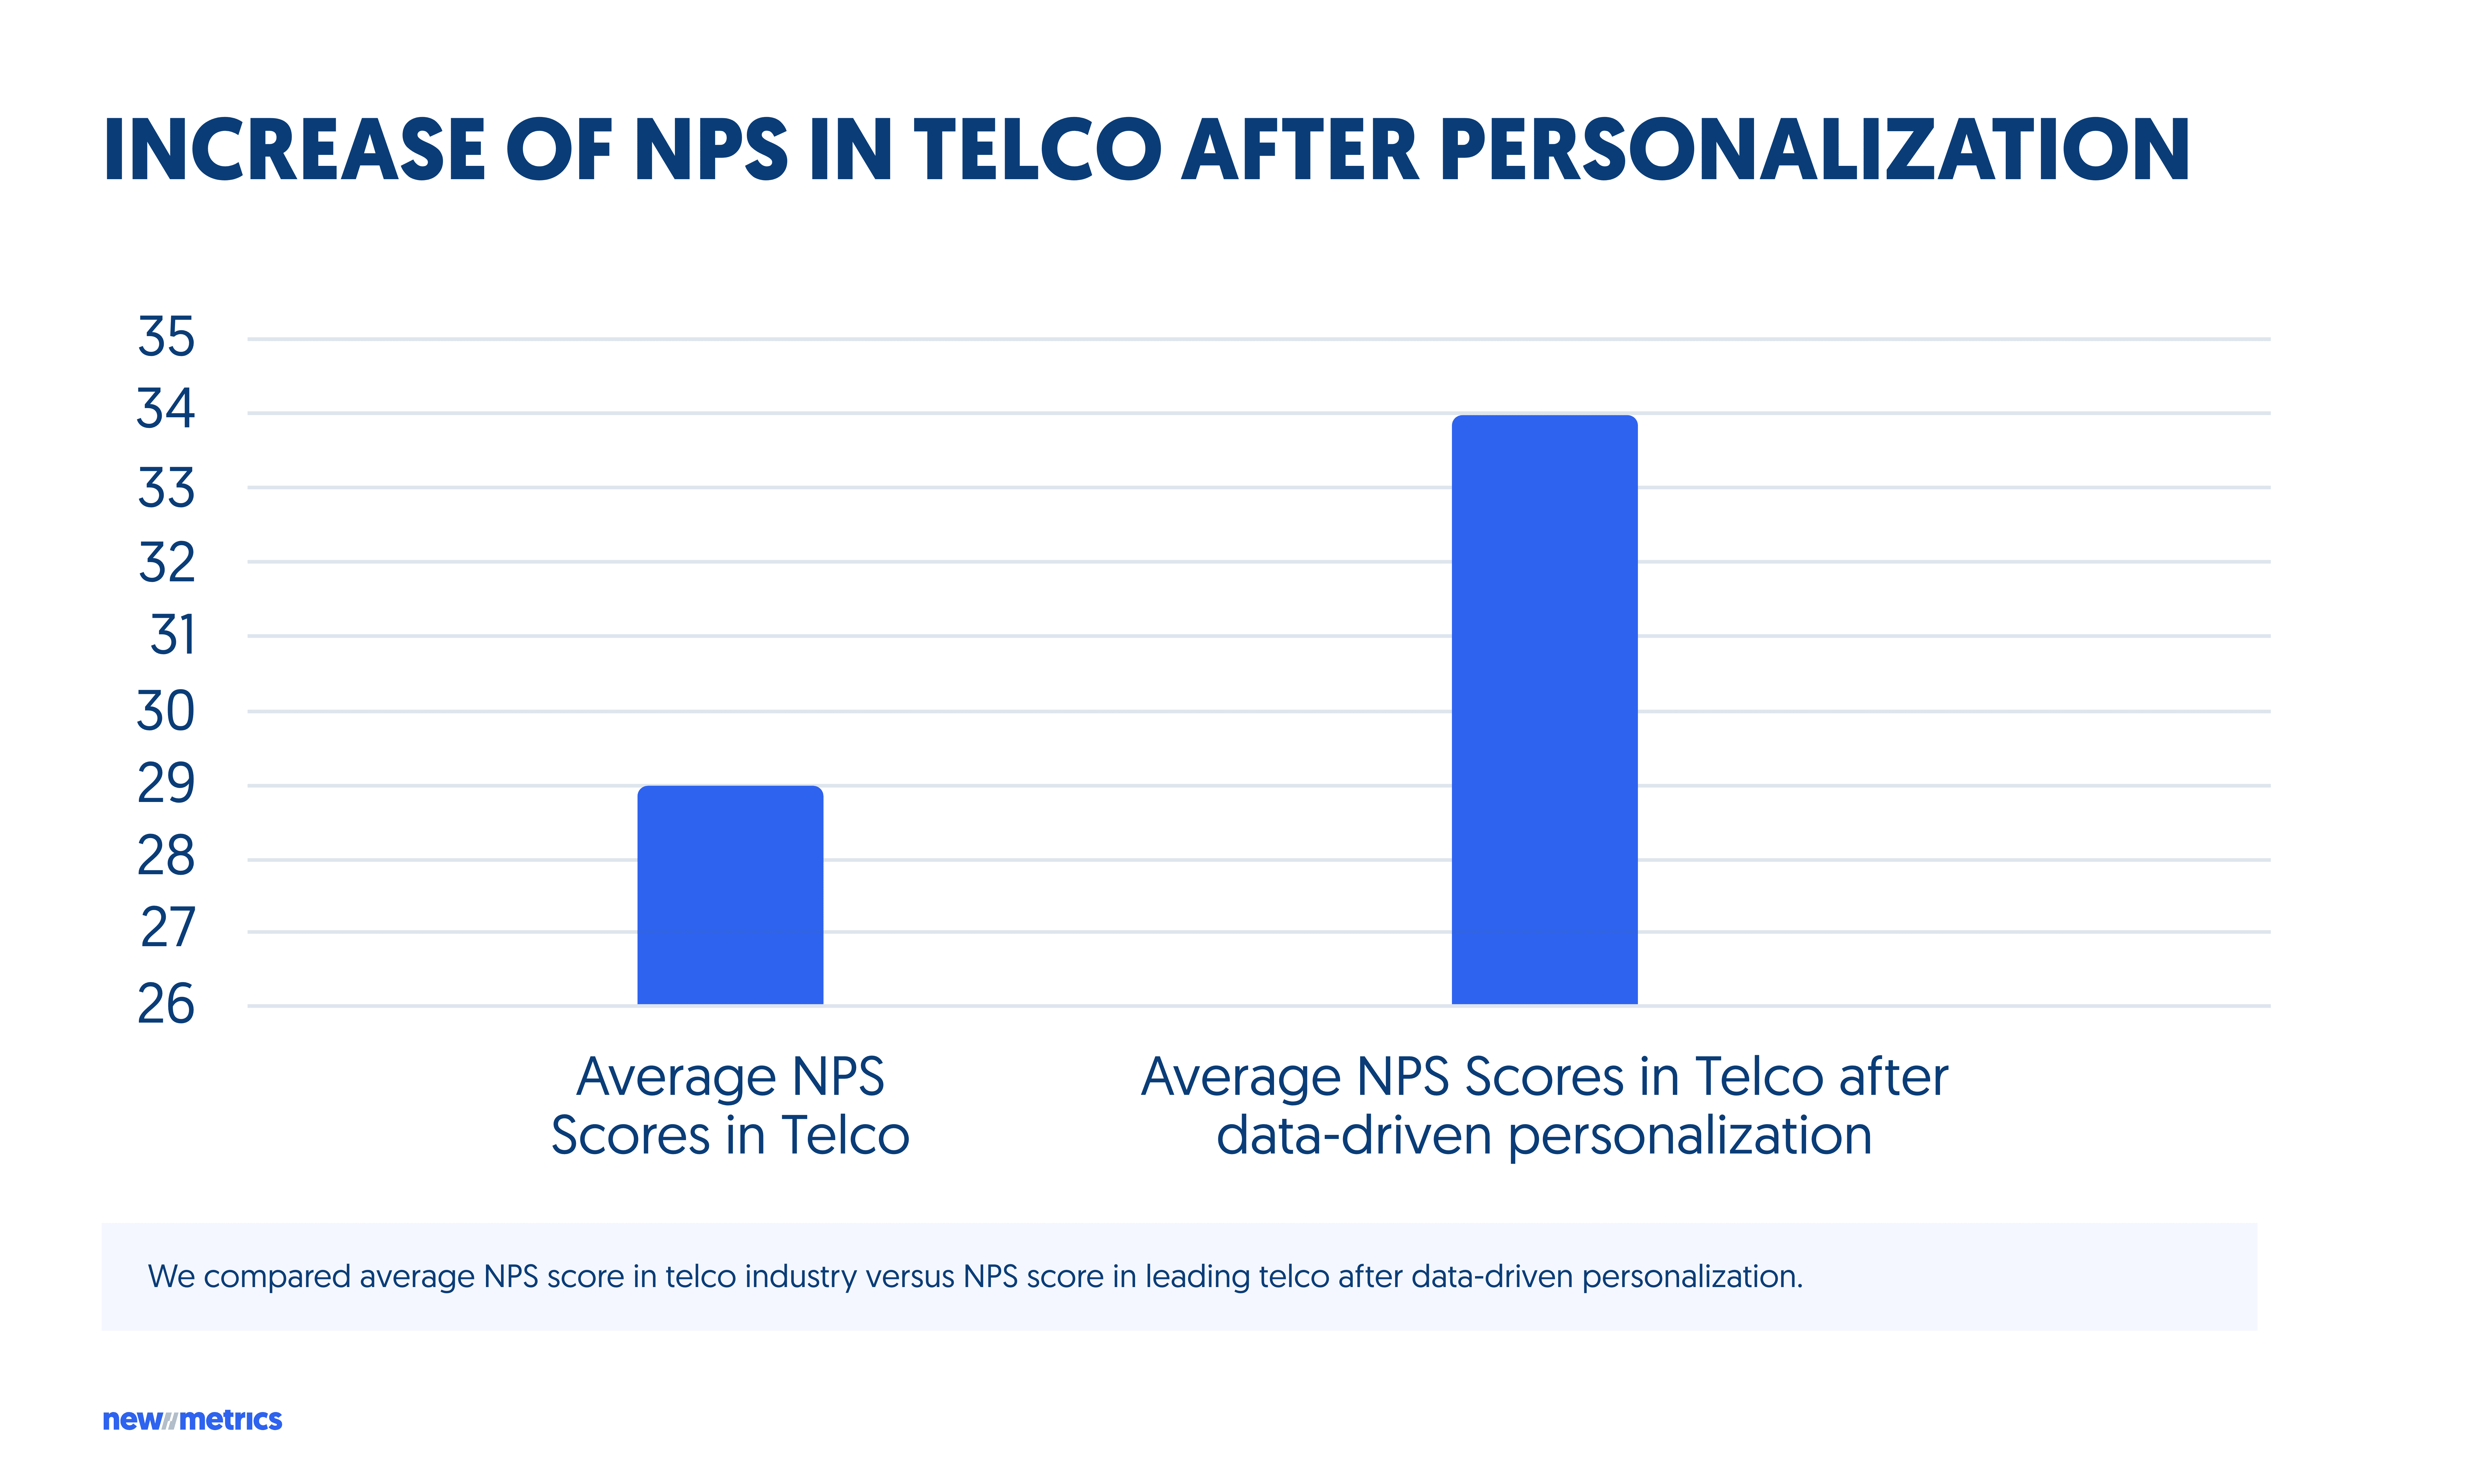 increased NPS after personalization